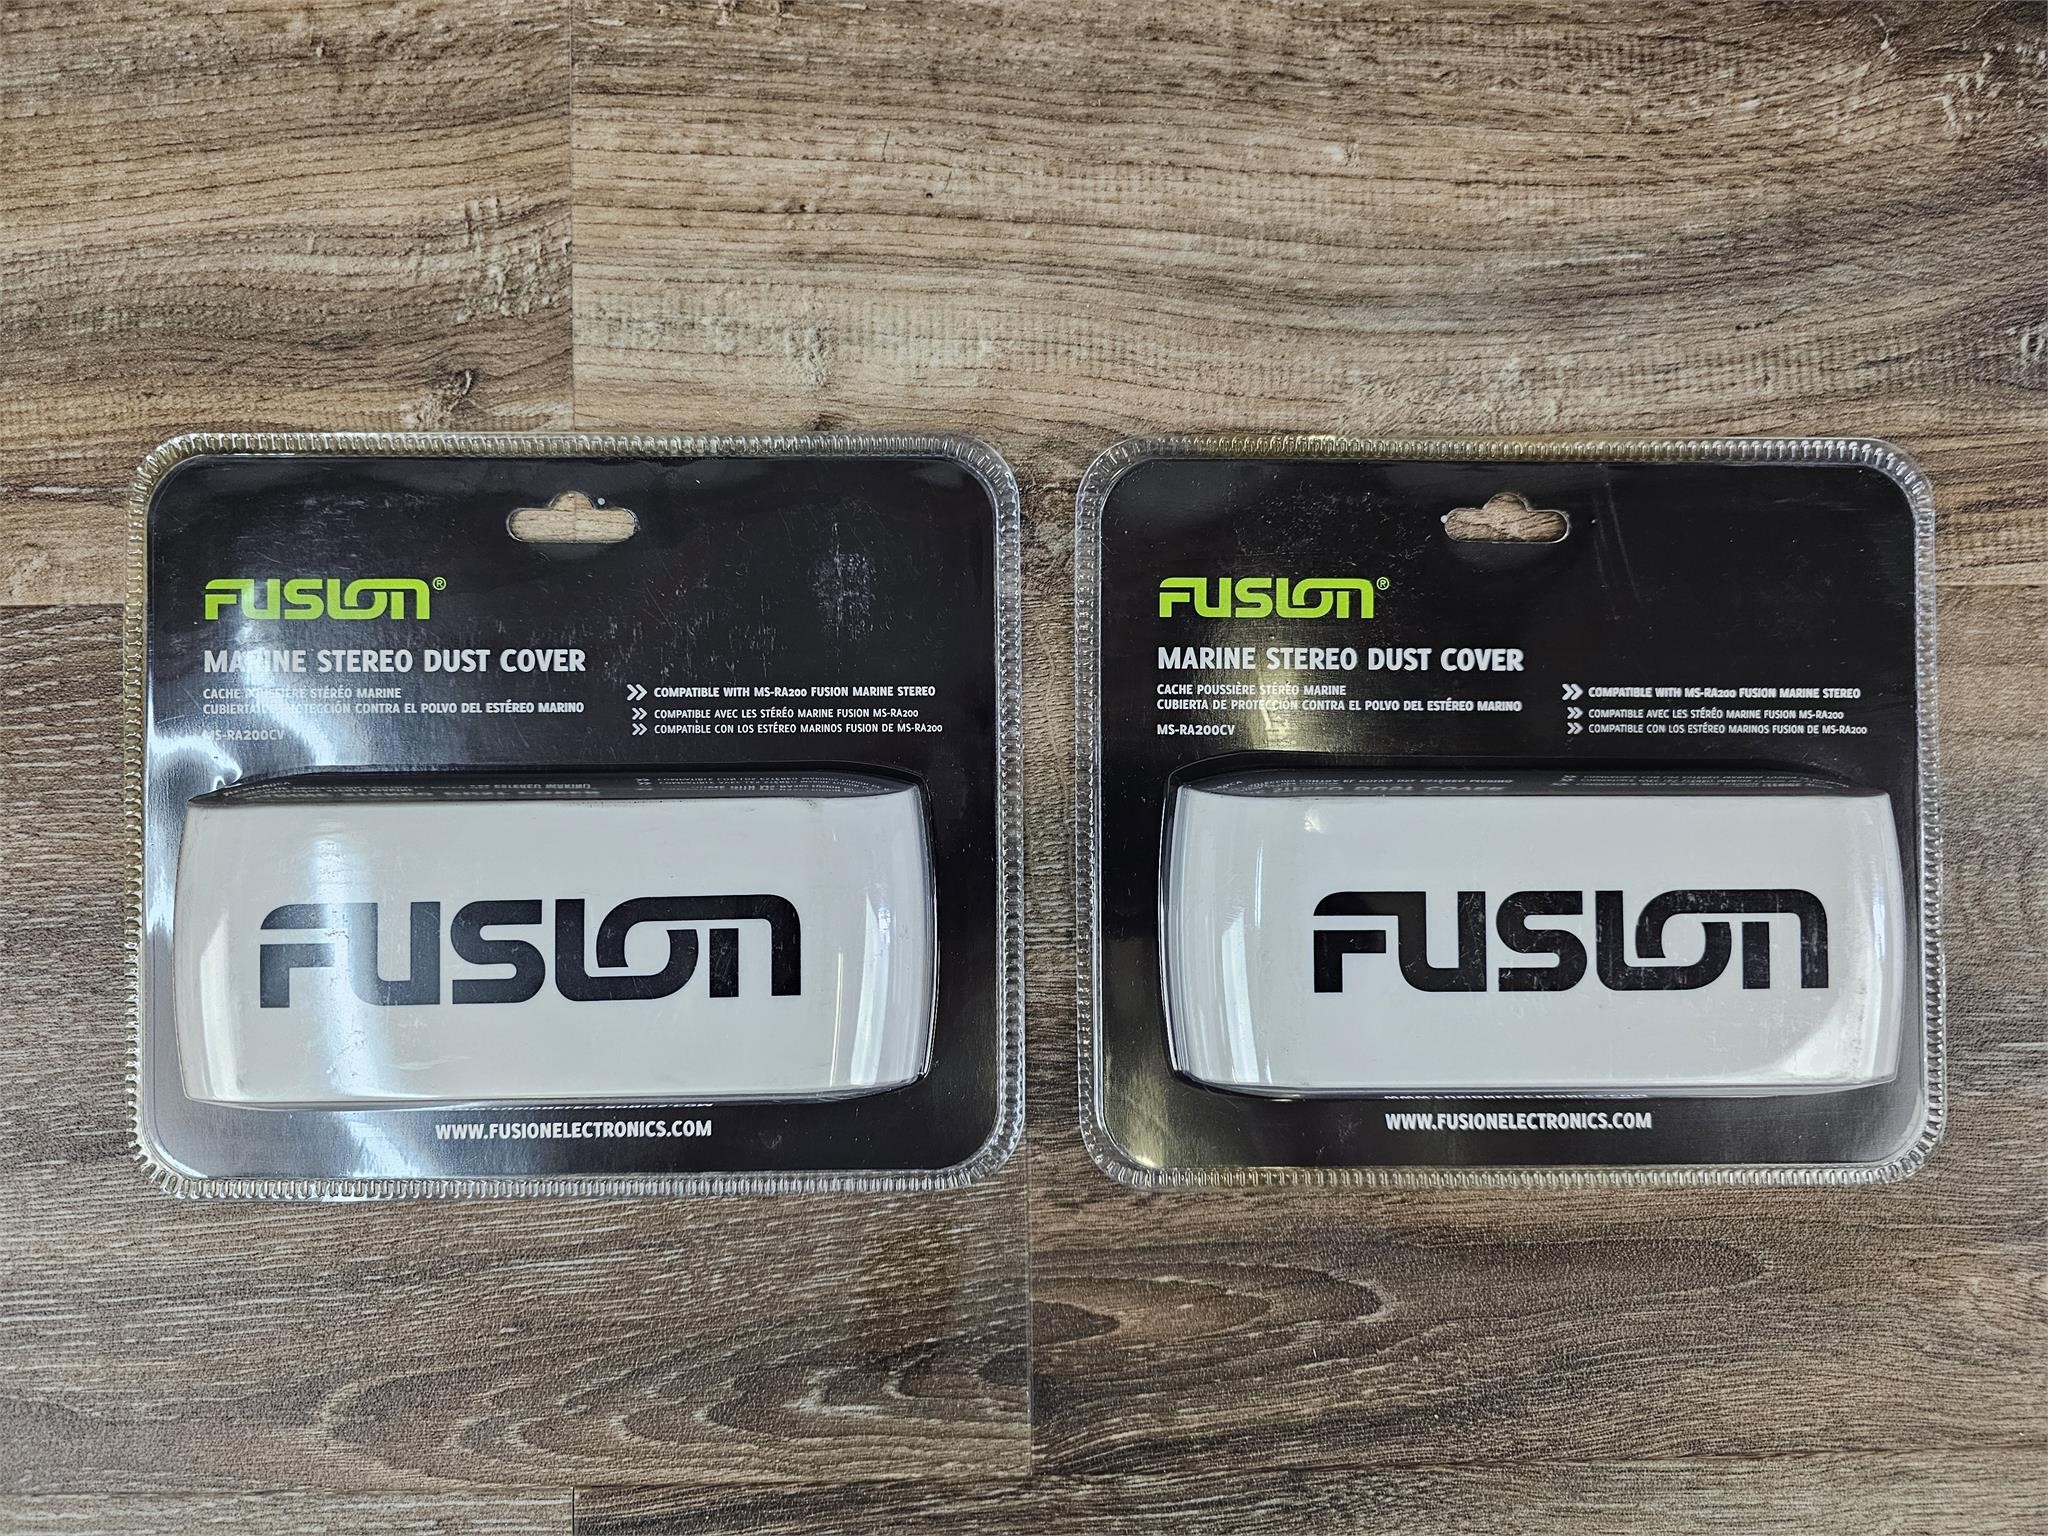 Lot of 2 Fusion Marine Stereo Dust Covers